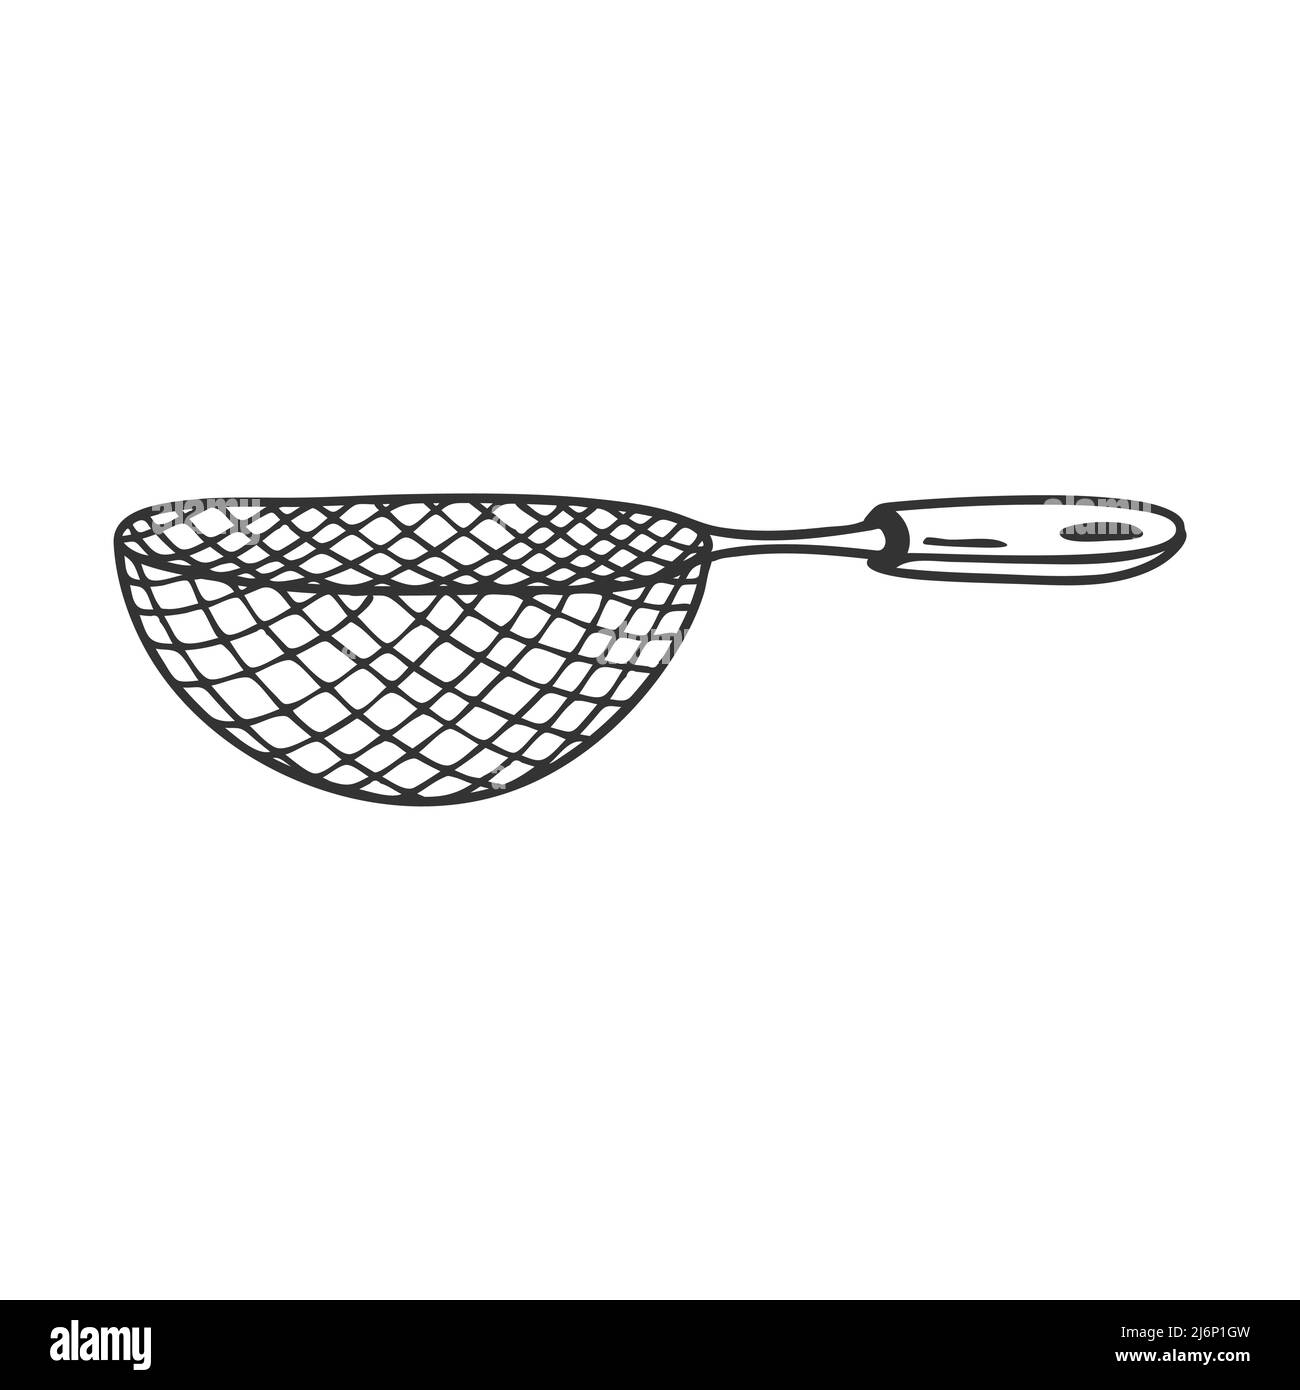 Sieve or colander. Kitchen tools, utensils for sifting flour. Decorative element for menu design, recipes, and food packaging. Hand-drawn and isolated Stock Vector